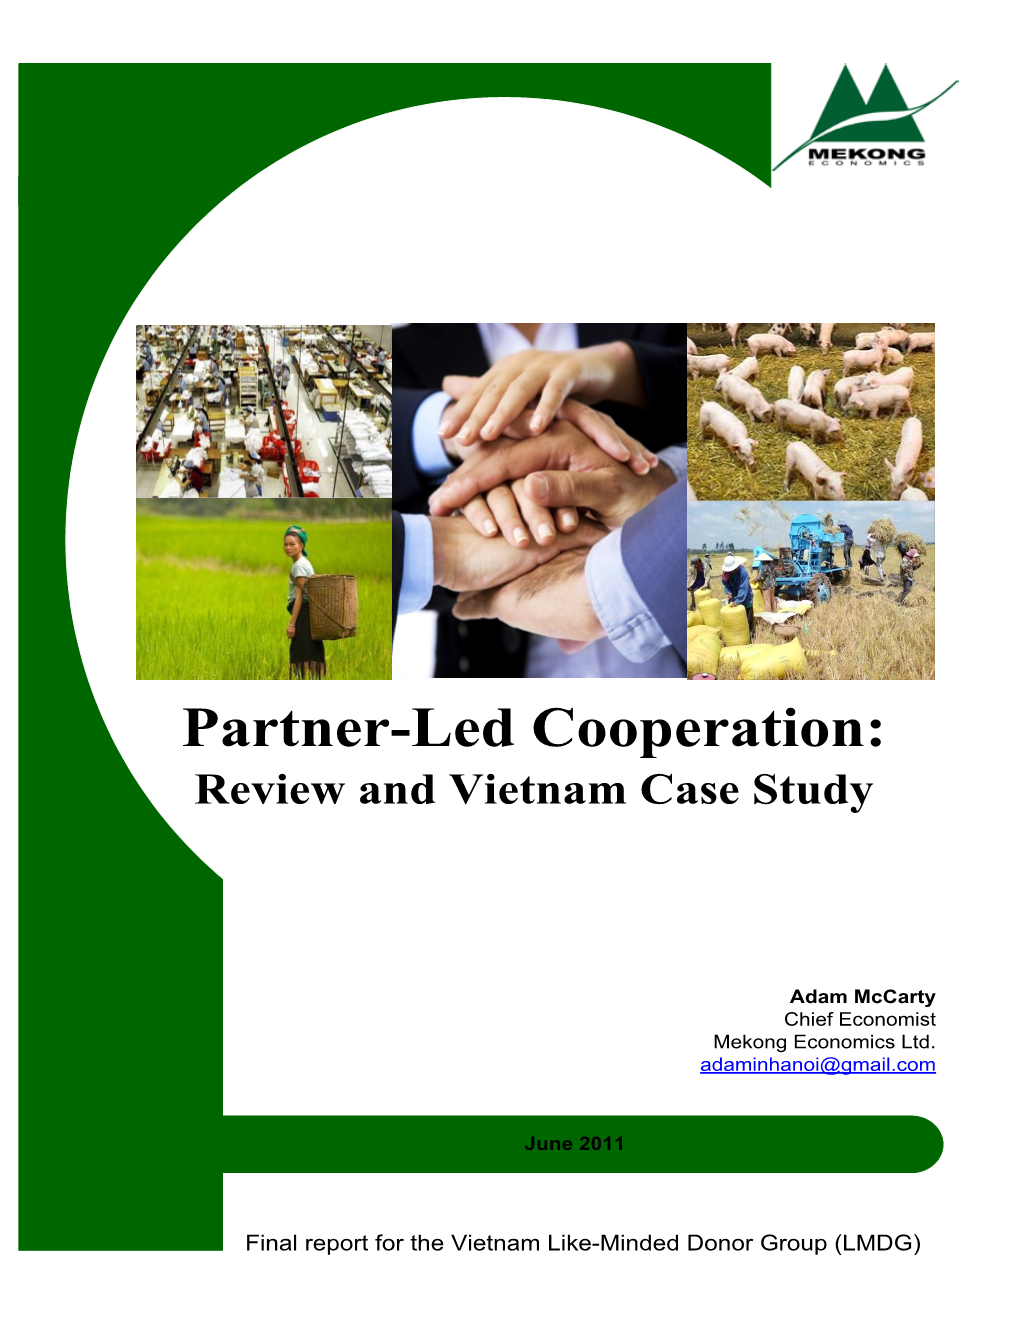 Partner-Led Cooperation: Review and Vietnam Case Study